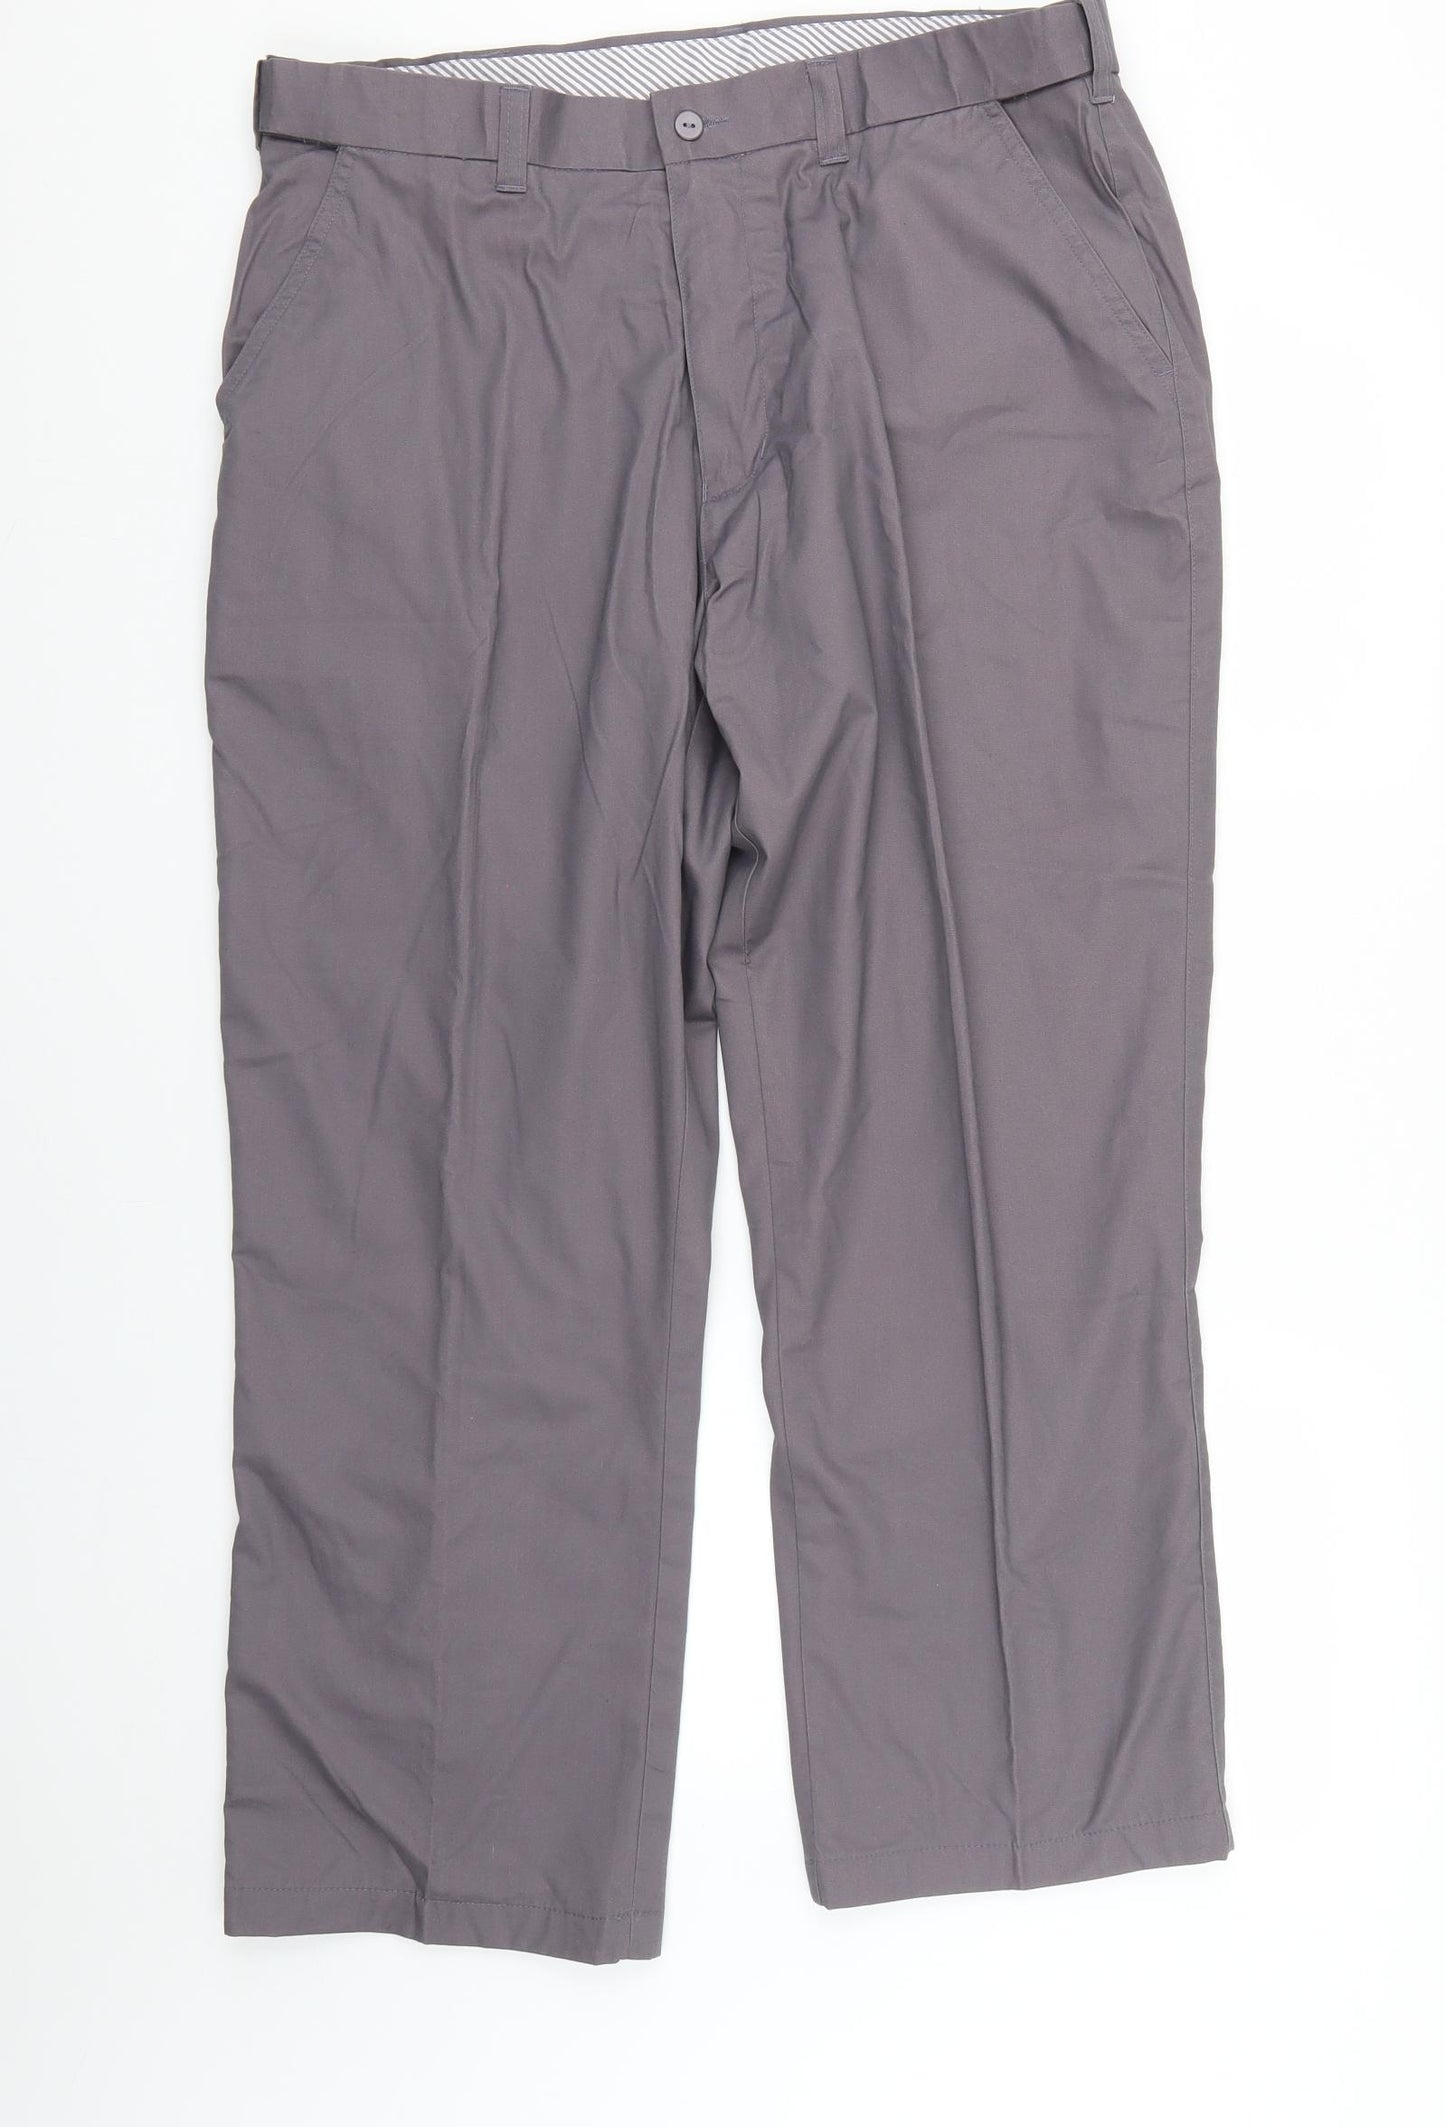 Clifford James Mens Grey   Trousers  Size XS L25 in